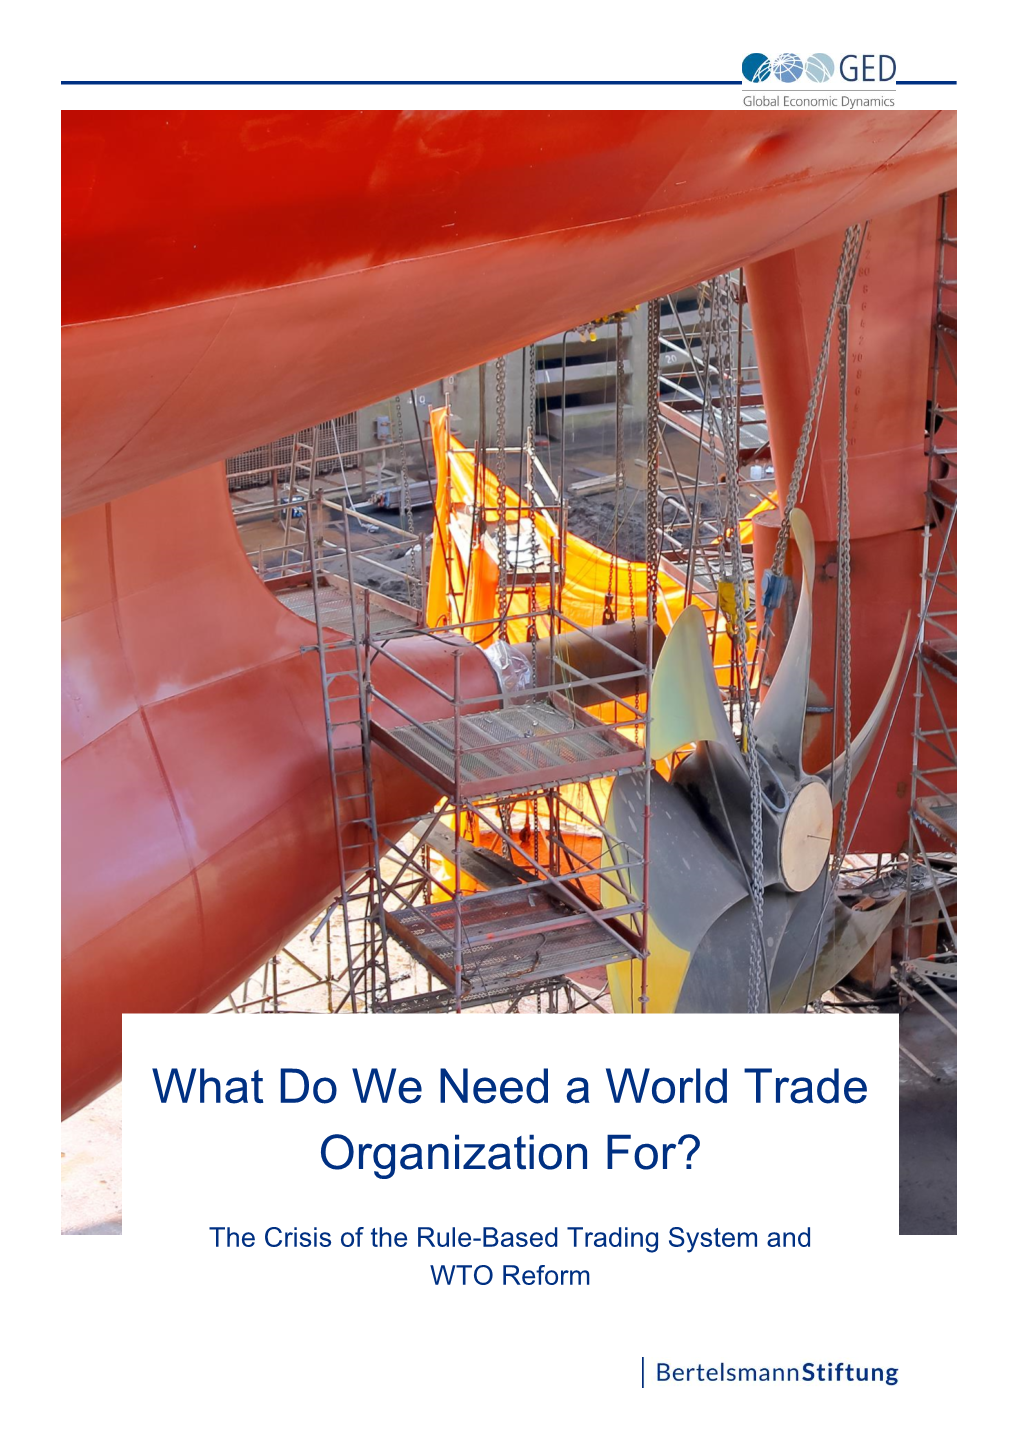 What Do We Need a World Trade Organization For?